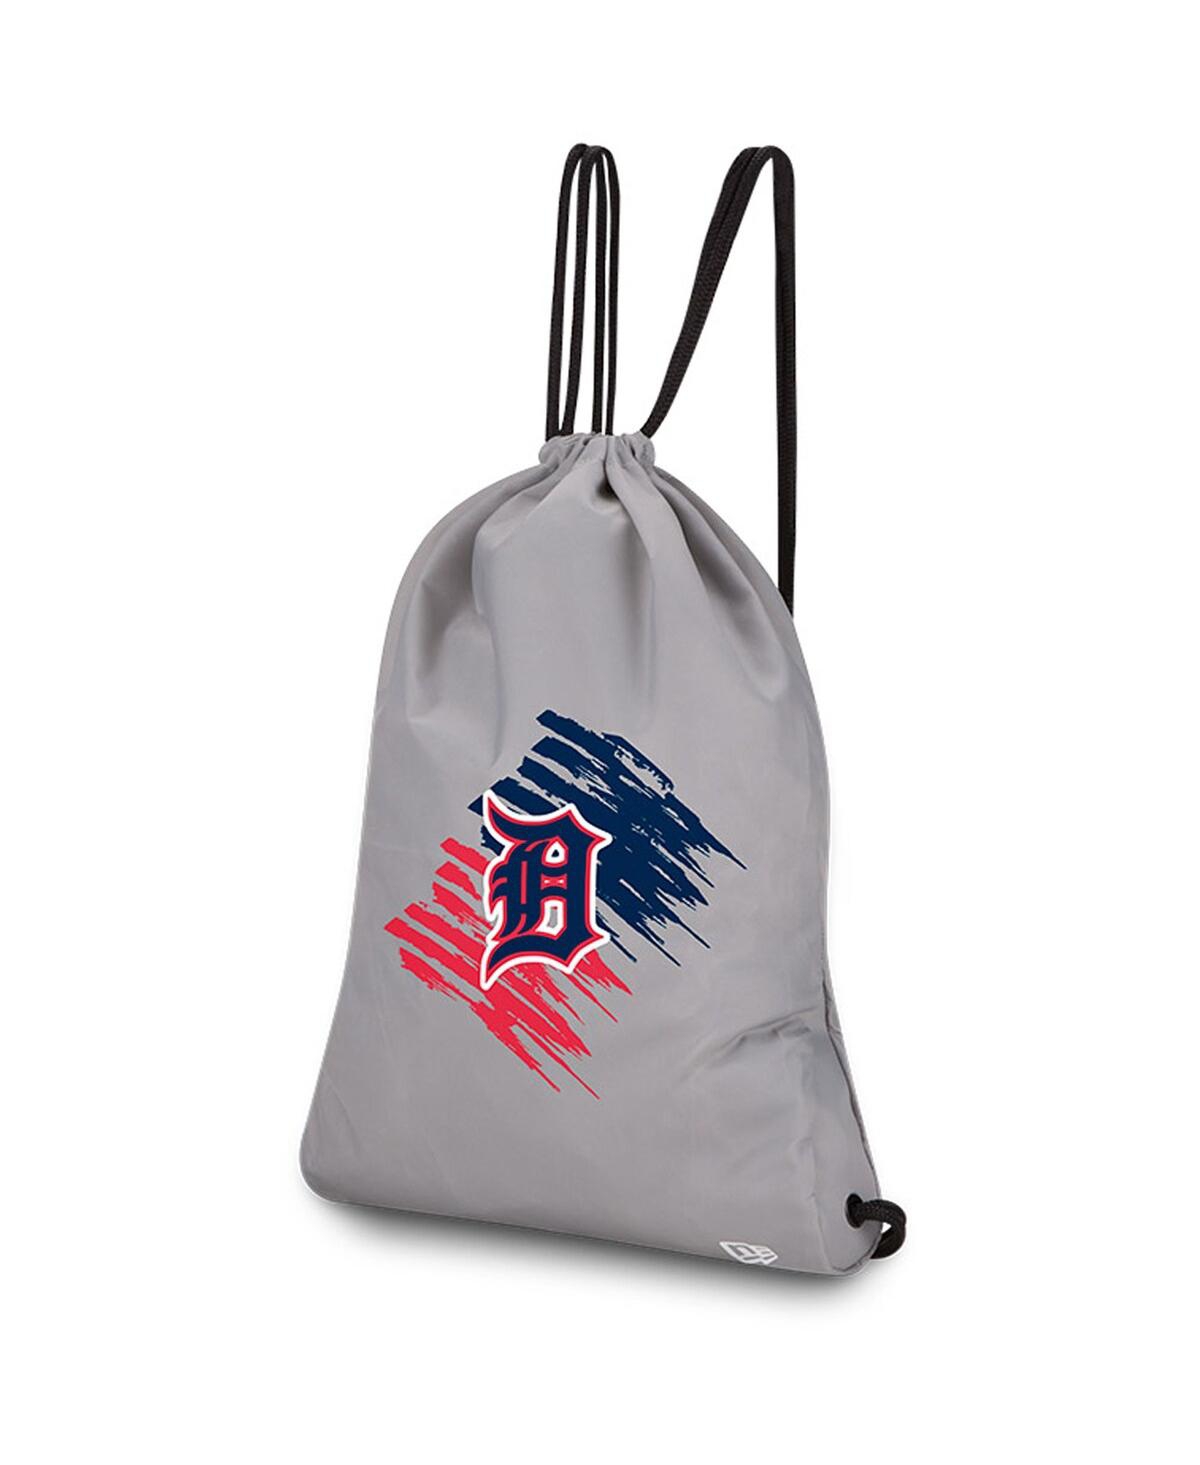 Men's and Women's New Era Detroit Tigers 4th of July Gym Sack - Gray